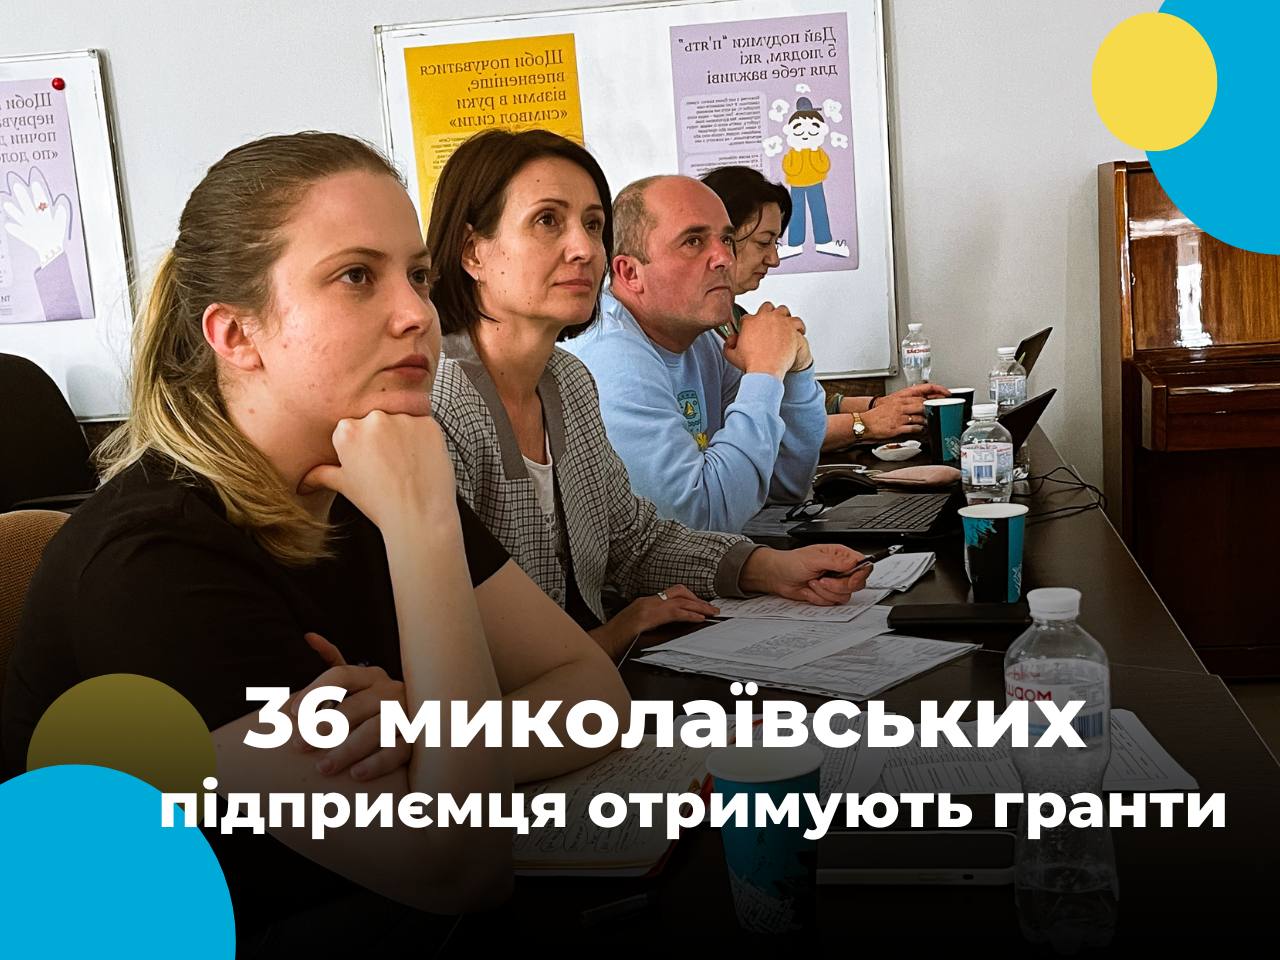 36 entrepreneurs from Mykolaiv receive grants for business development from Shchedryk and Oxfam.